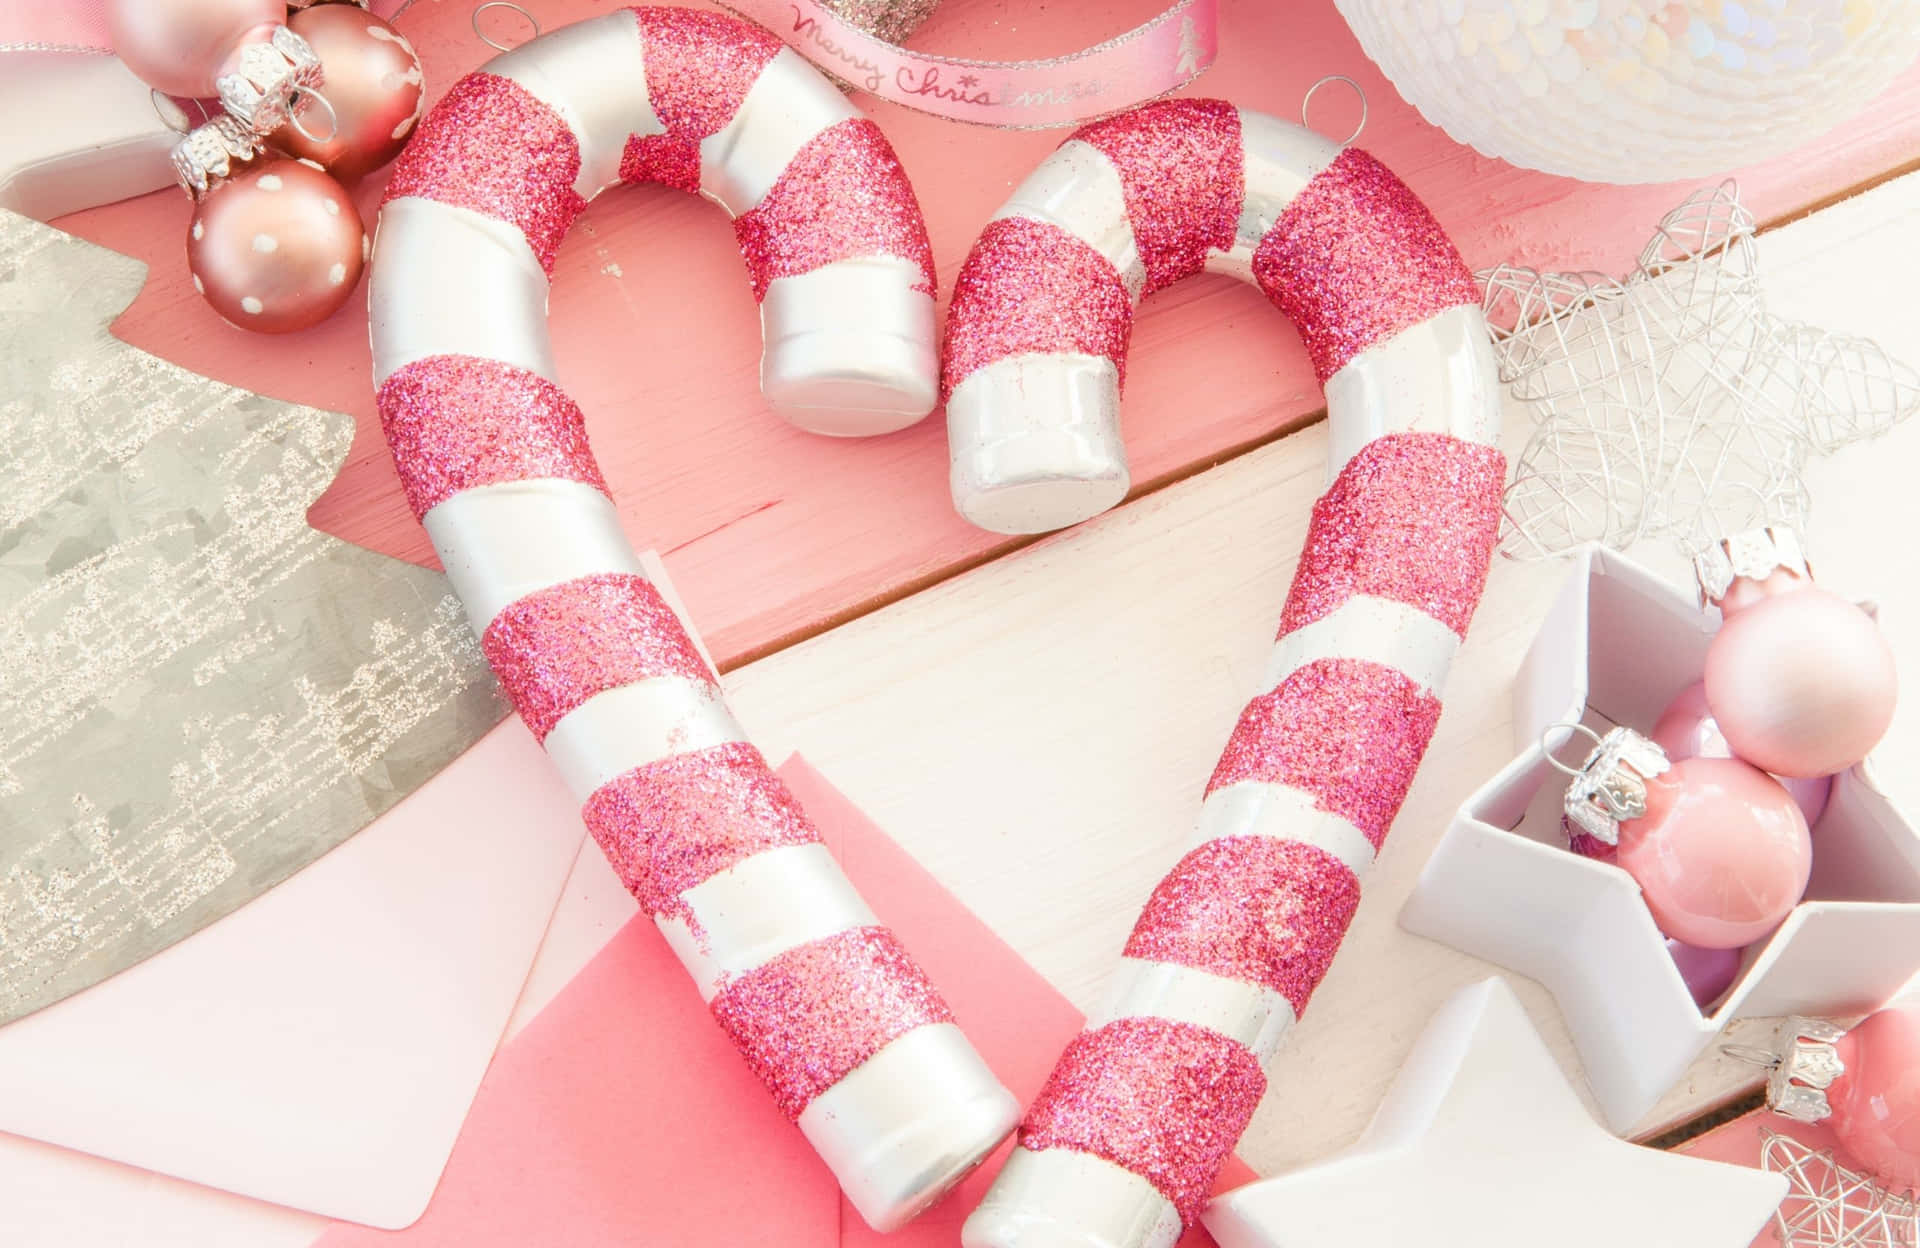 Celebrate the Holidays with a Festive Pink Christmas